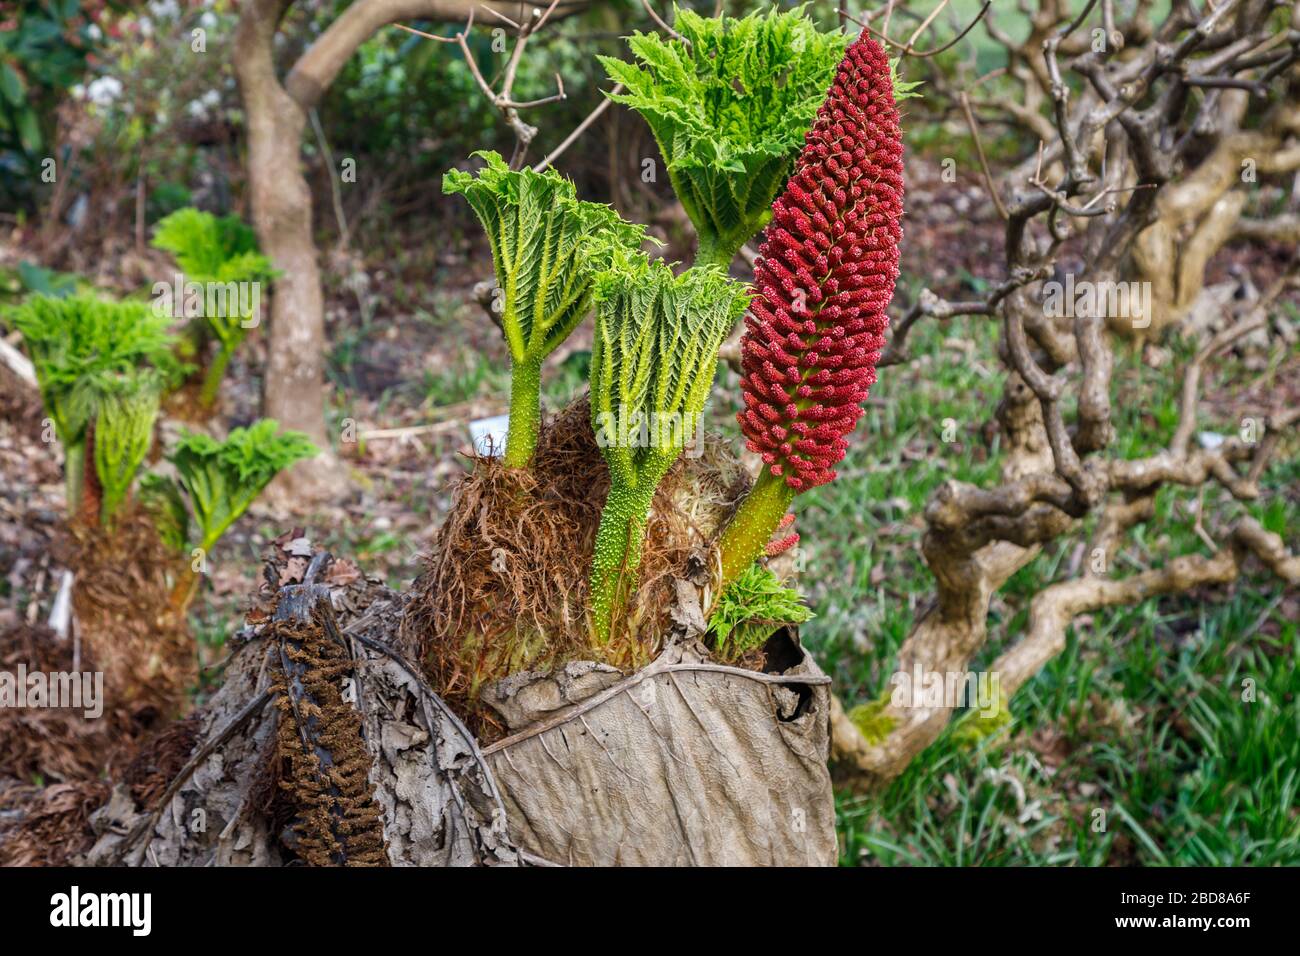 Gunnera tinctoria, the giant rhubarb or Chilean rhubarb, native to southern Chile and Argentina, in the RHS Garden, Wisley, Surrey in spring Stock Photo